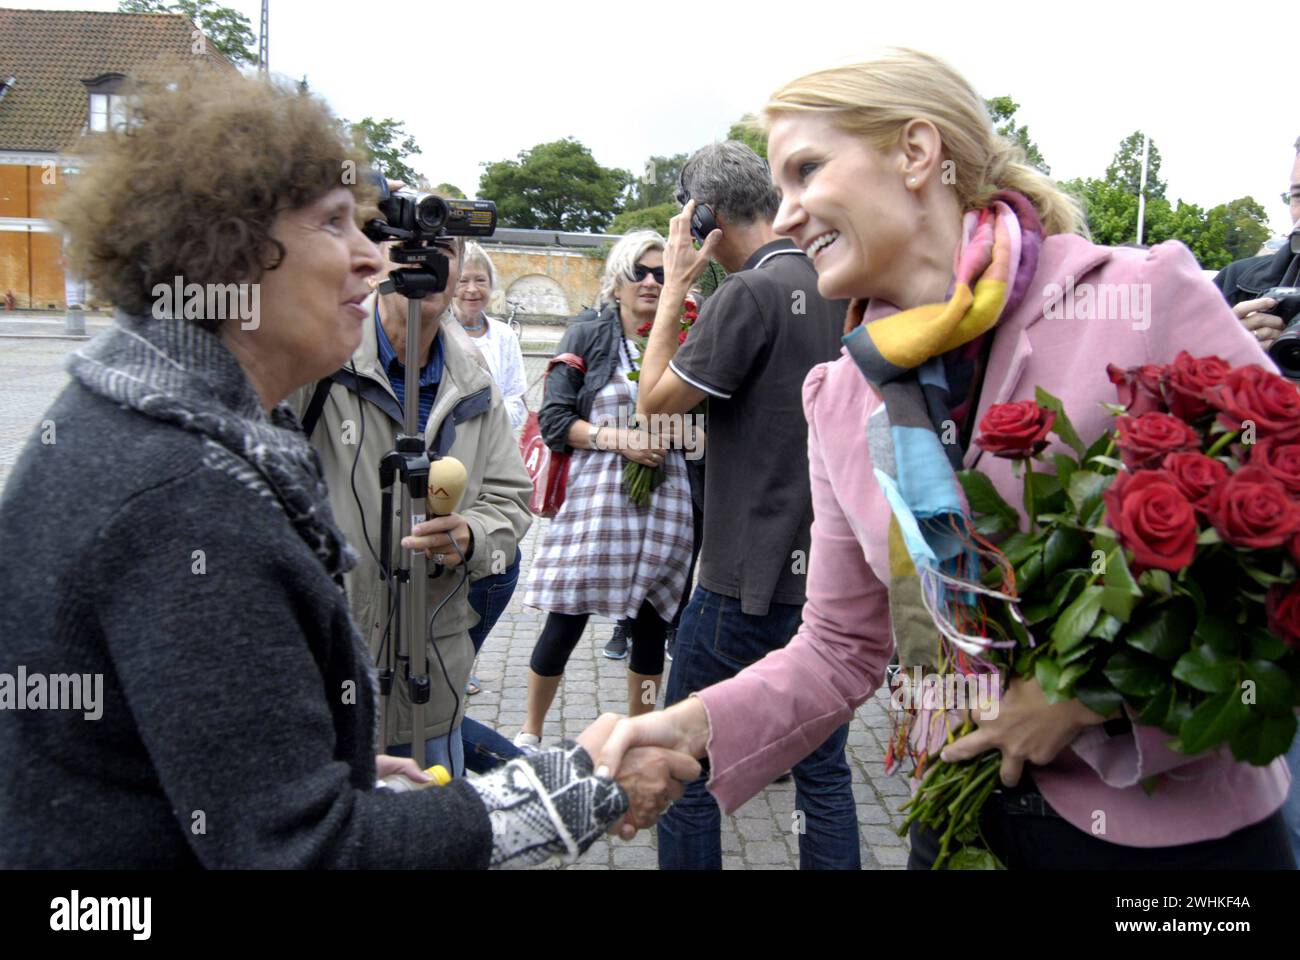 COPENHAGEN  DENMARK. Helle Thorning -Schmidt,oppostion social democrat leader and candiate for prime minister post for social democrat party on her elections compaign,meet her voters and some are really angry social democrat ,Helle met her party soldiers /workers and danish voter, danish General parliament elections will take plass on sept.25, 2011, Helle today spends her morning at frederiksberg have gives free red roses to voters, she met her muslim member of parlia from Turkey and Pakistan, these are cadidate for parliaments 28 August 2011 PHOTOS BY FRANCIS JOSEPH DEAN/DEAN PICTURES Stock Photo